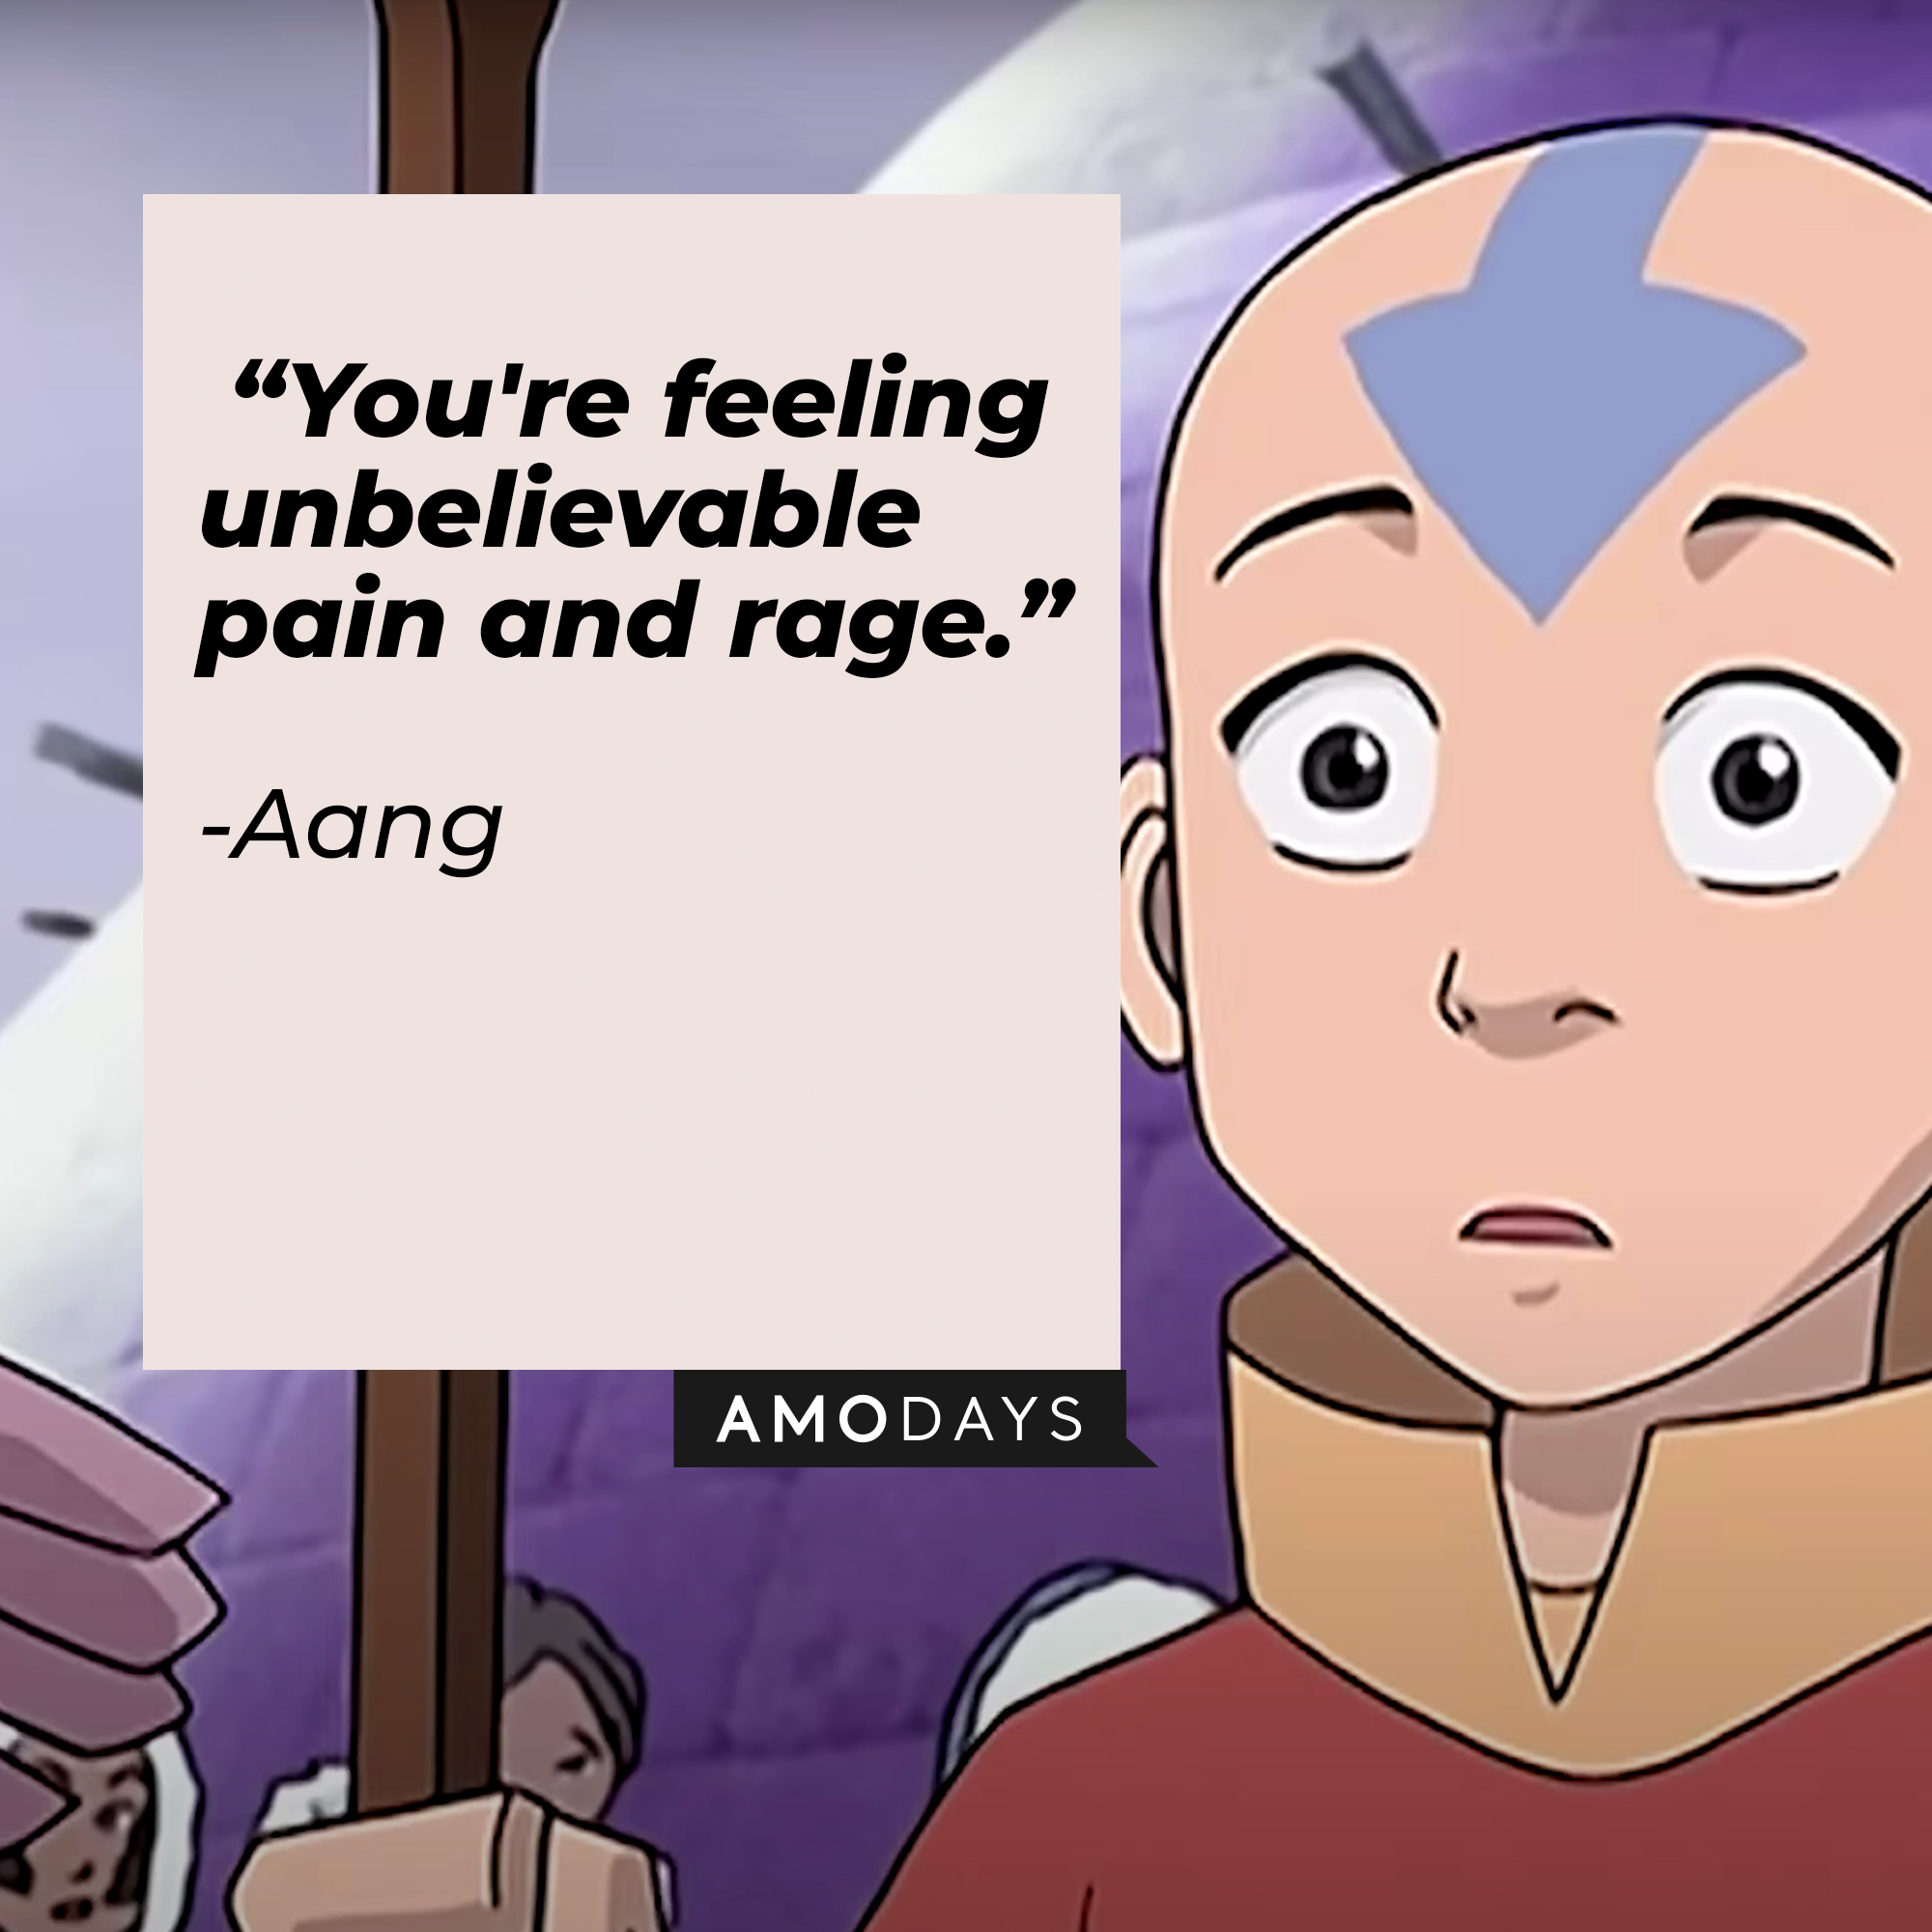 Aang’s quote: “You're feeling unbelievable pain and rage.” | Source: Youtube.com/TeamAvatar